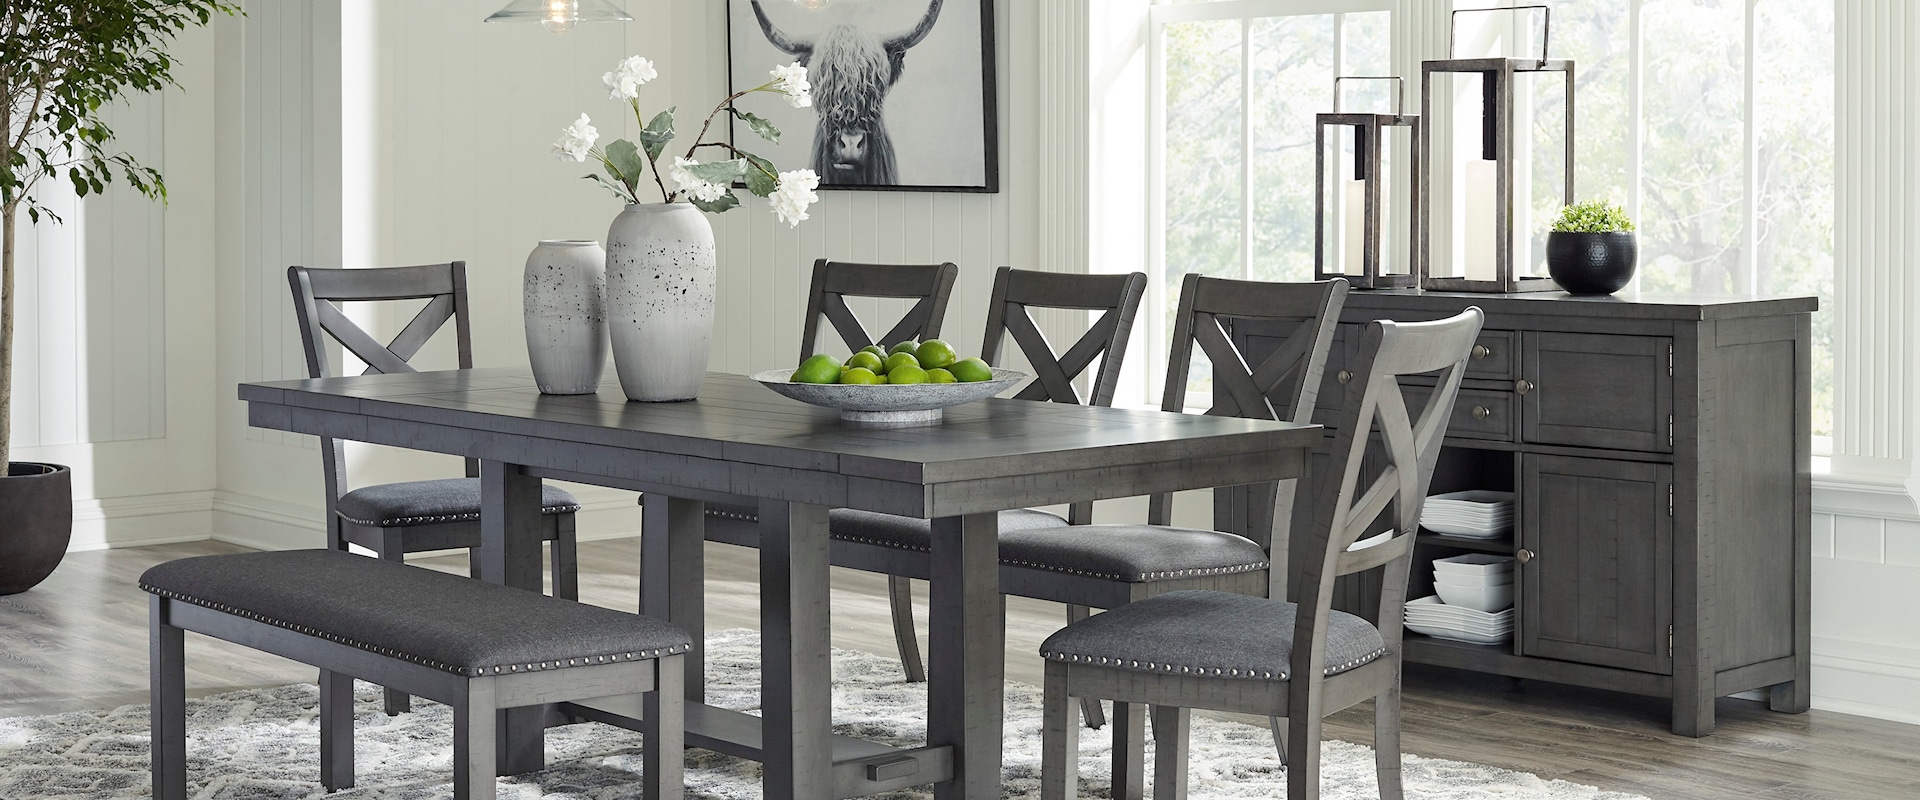 7 Piece Dining Set with Bench